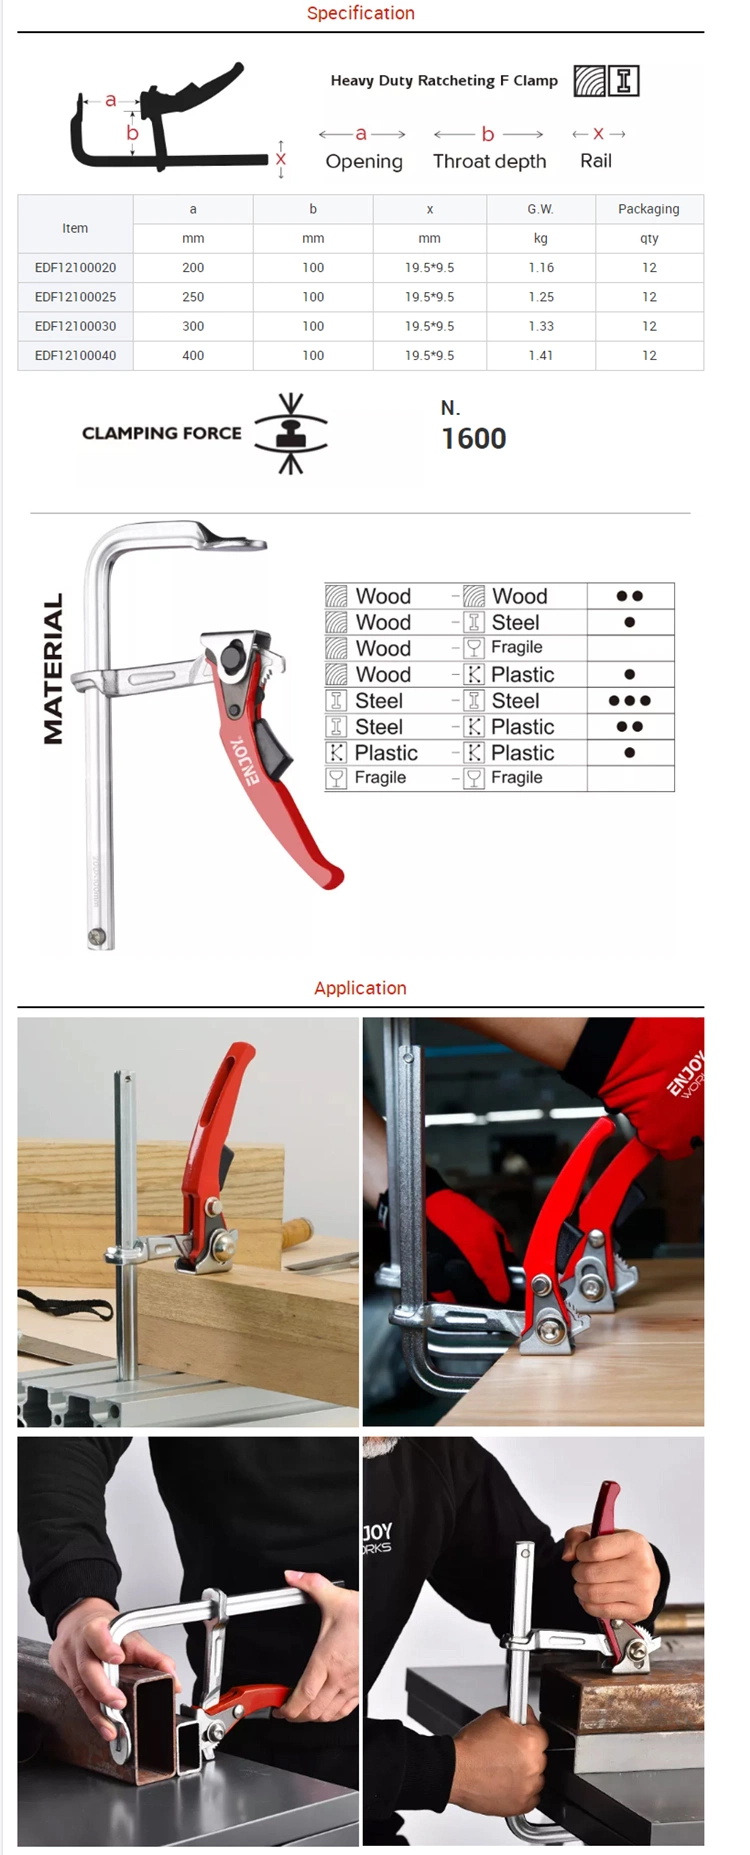 Woodworking Bar Clamp 4 Inch F Clamp Clip Bar Grip Quick Ratchet Release Squeeze Clamps Tools